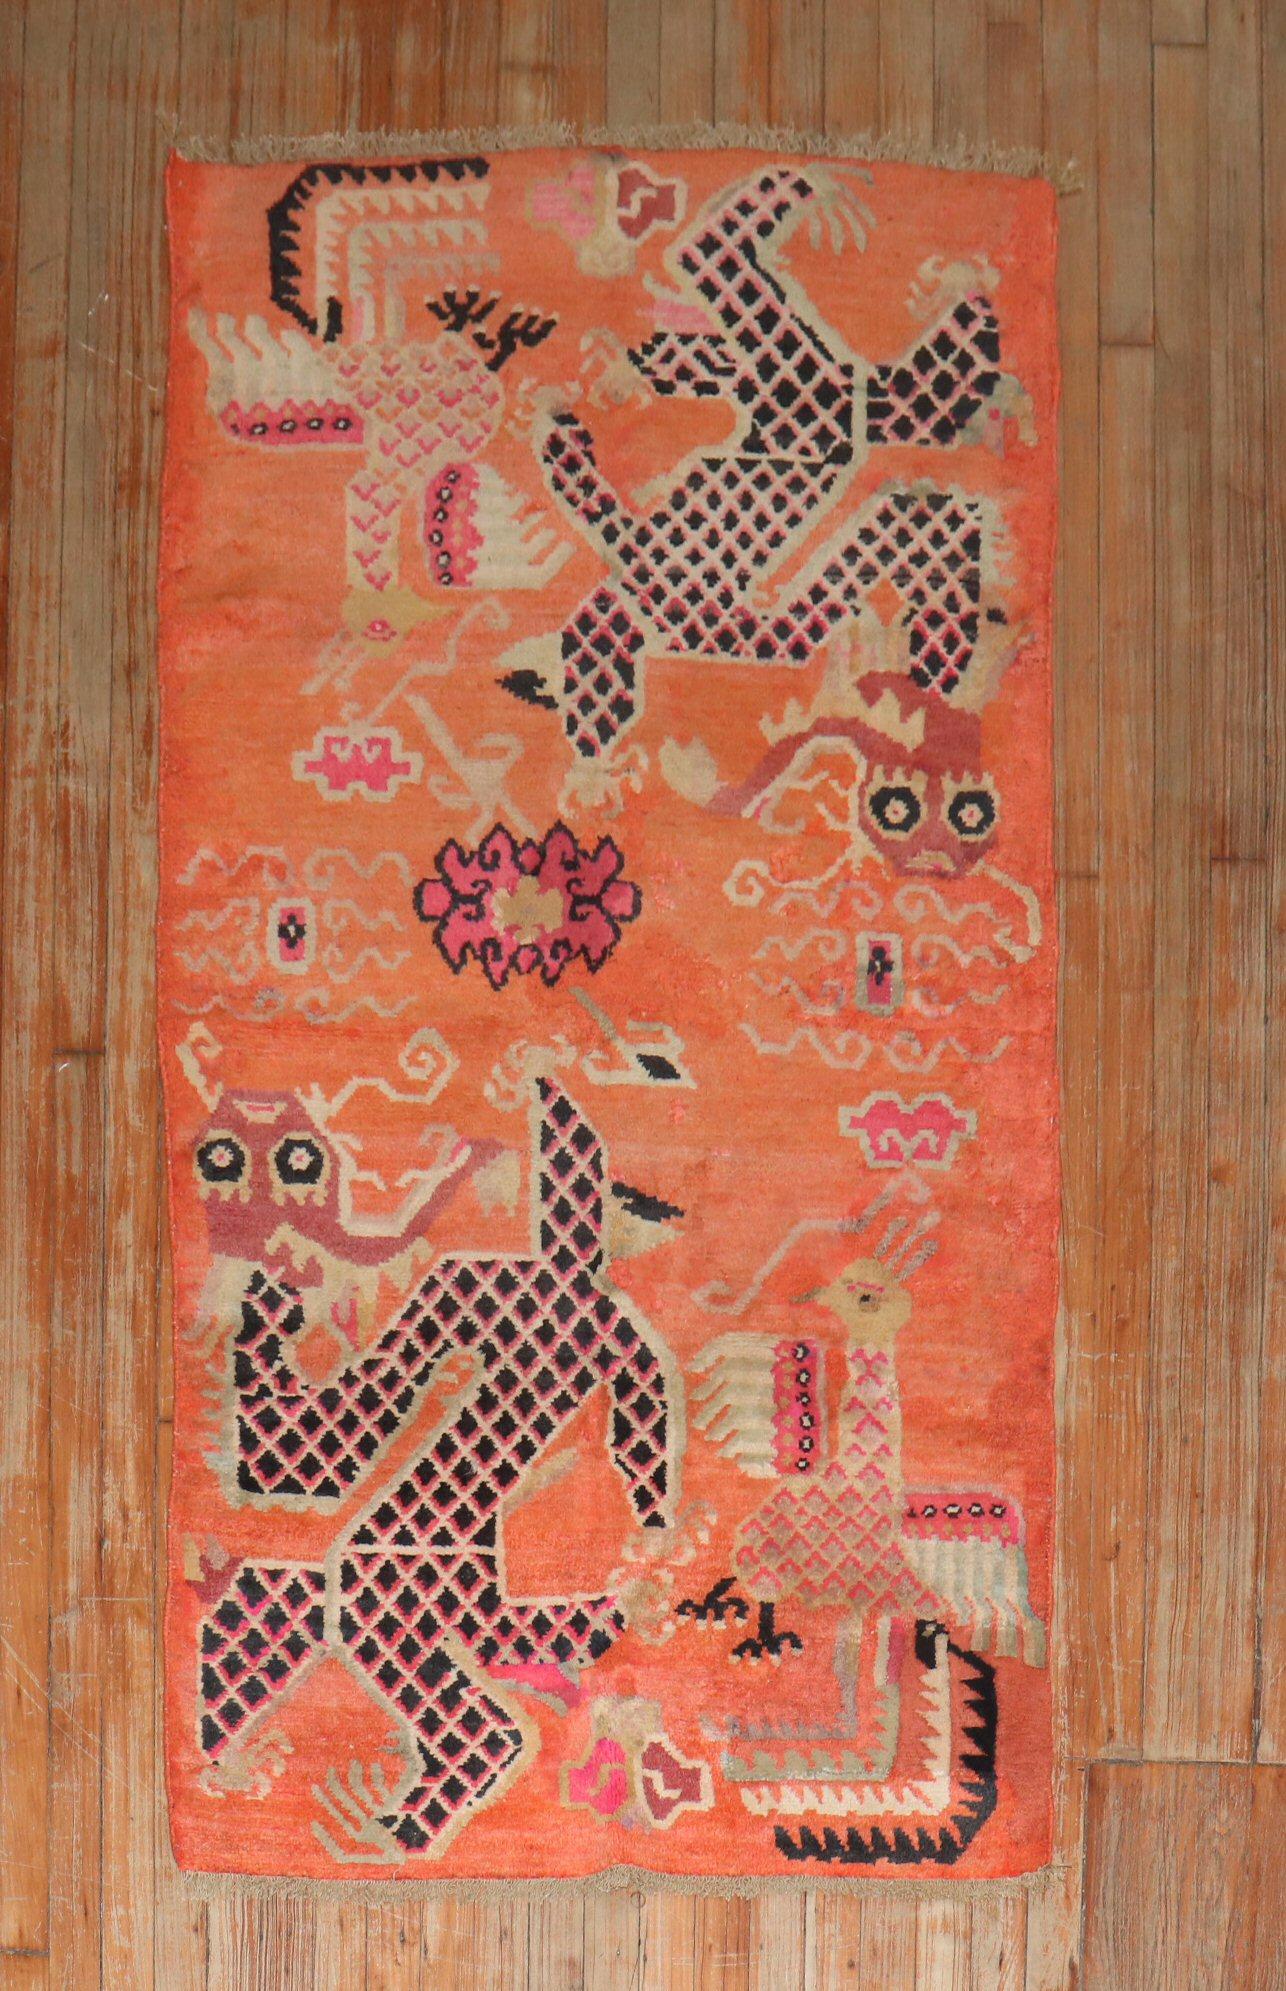 Colorful one-of-a-kind Tibetan rug from the 2nd quarter of the 20th century with a dragon motif on a bright orange field

Measures: 3'1'' x 5'9''.